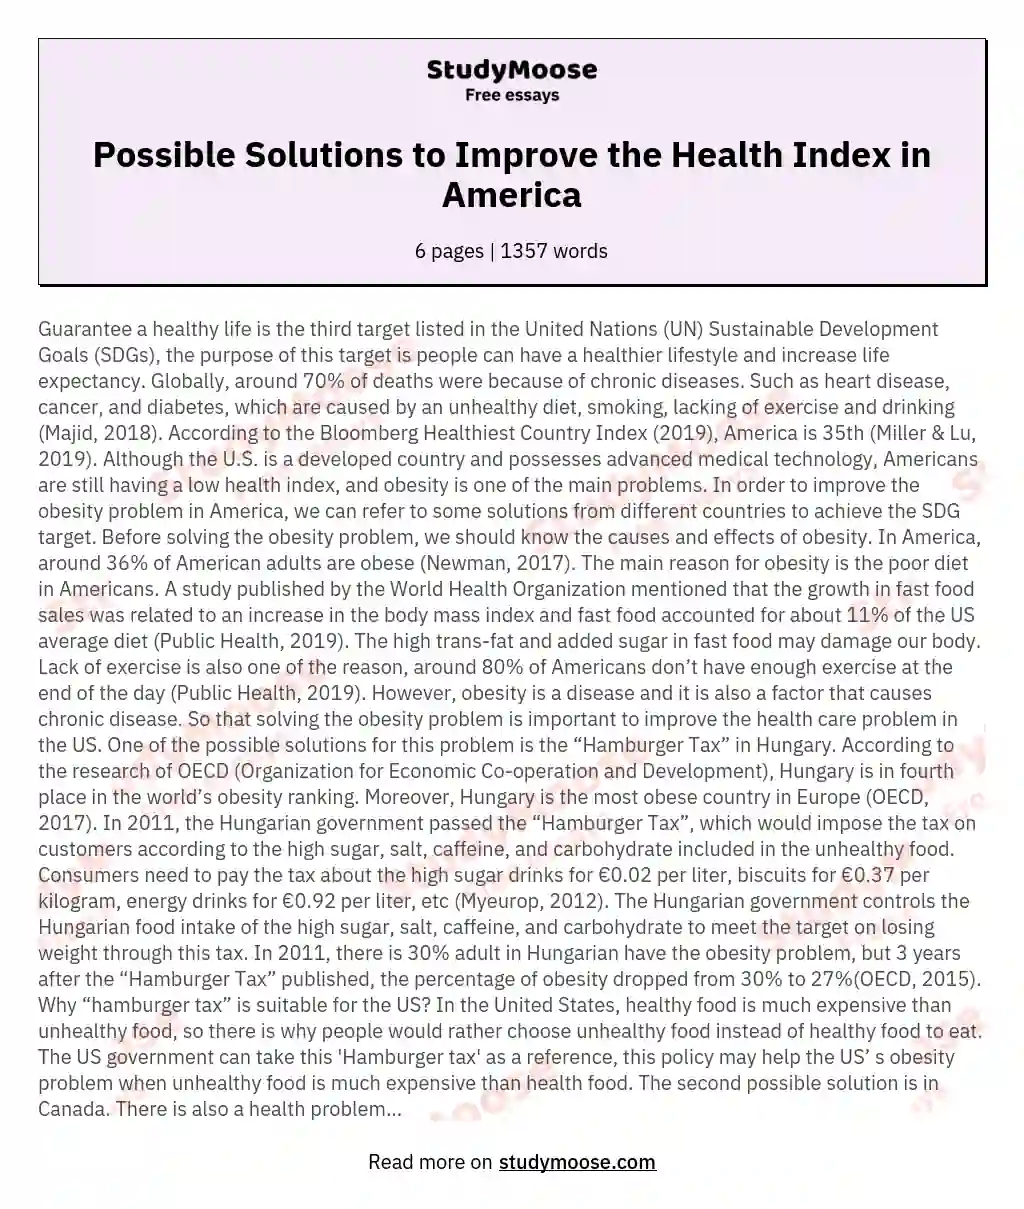 Possible Solutions to Improve the Health Index in America